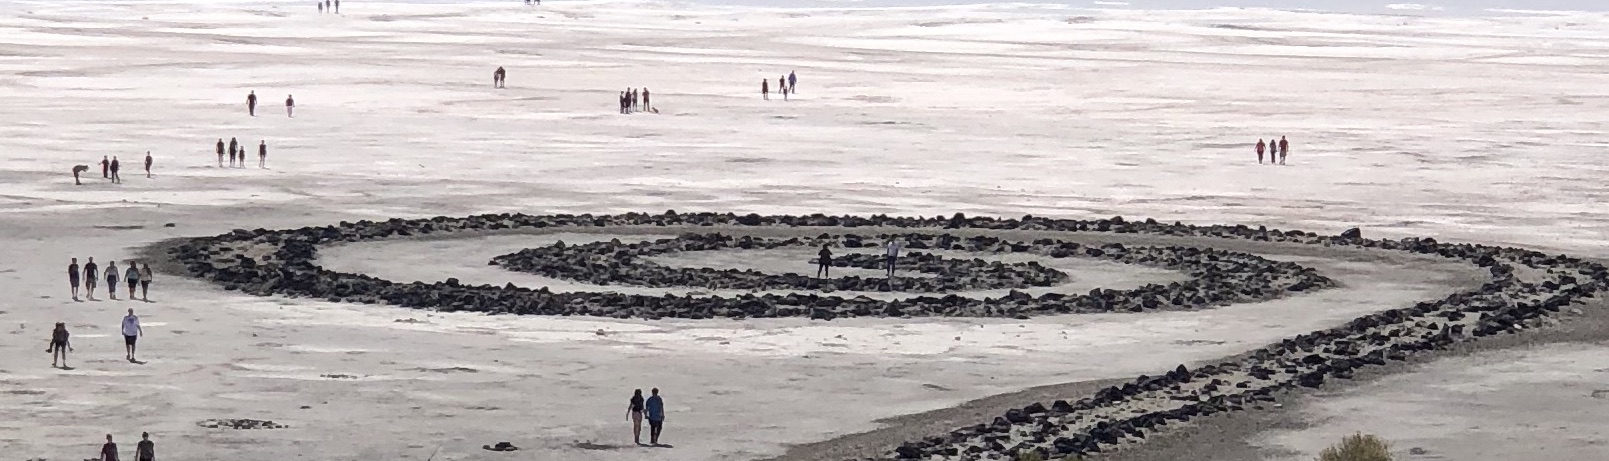 Spiral Jetty From Above. Photo: Allison Amon